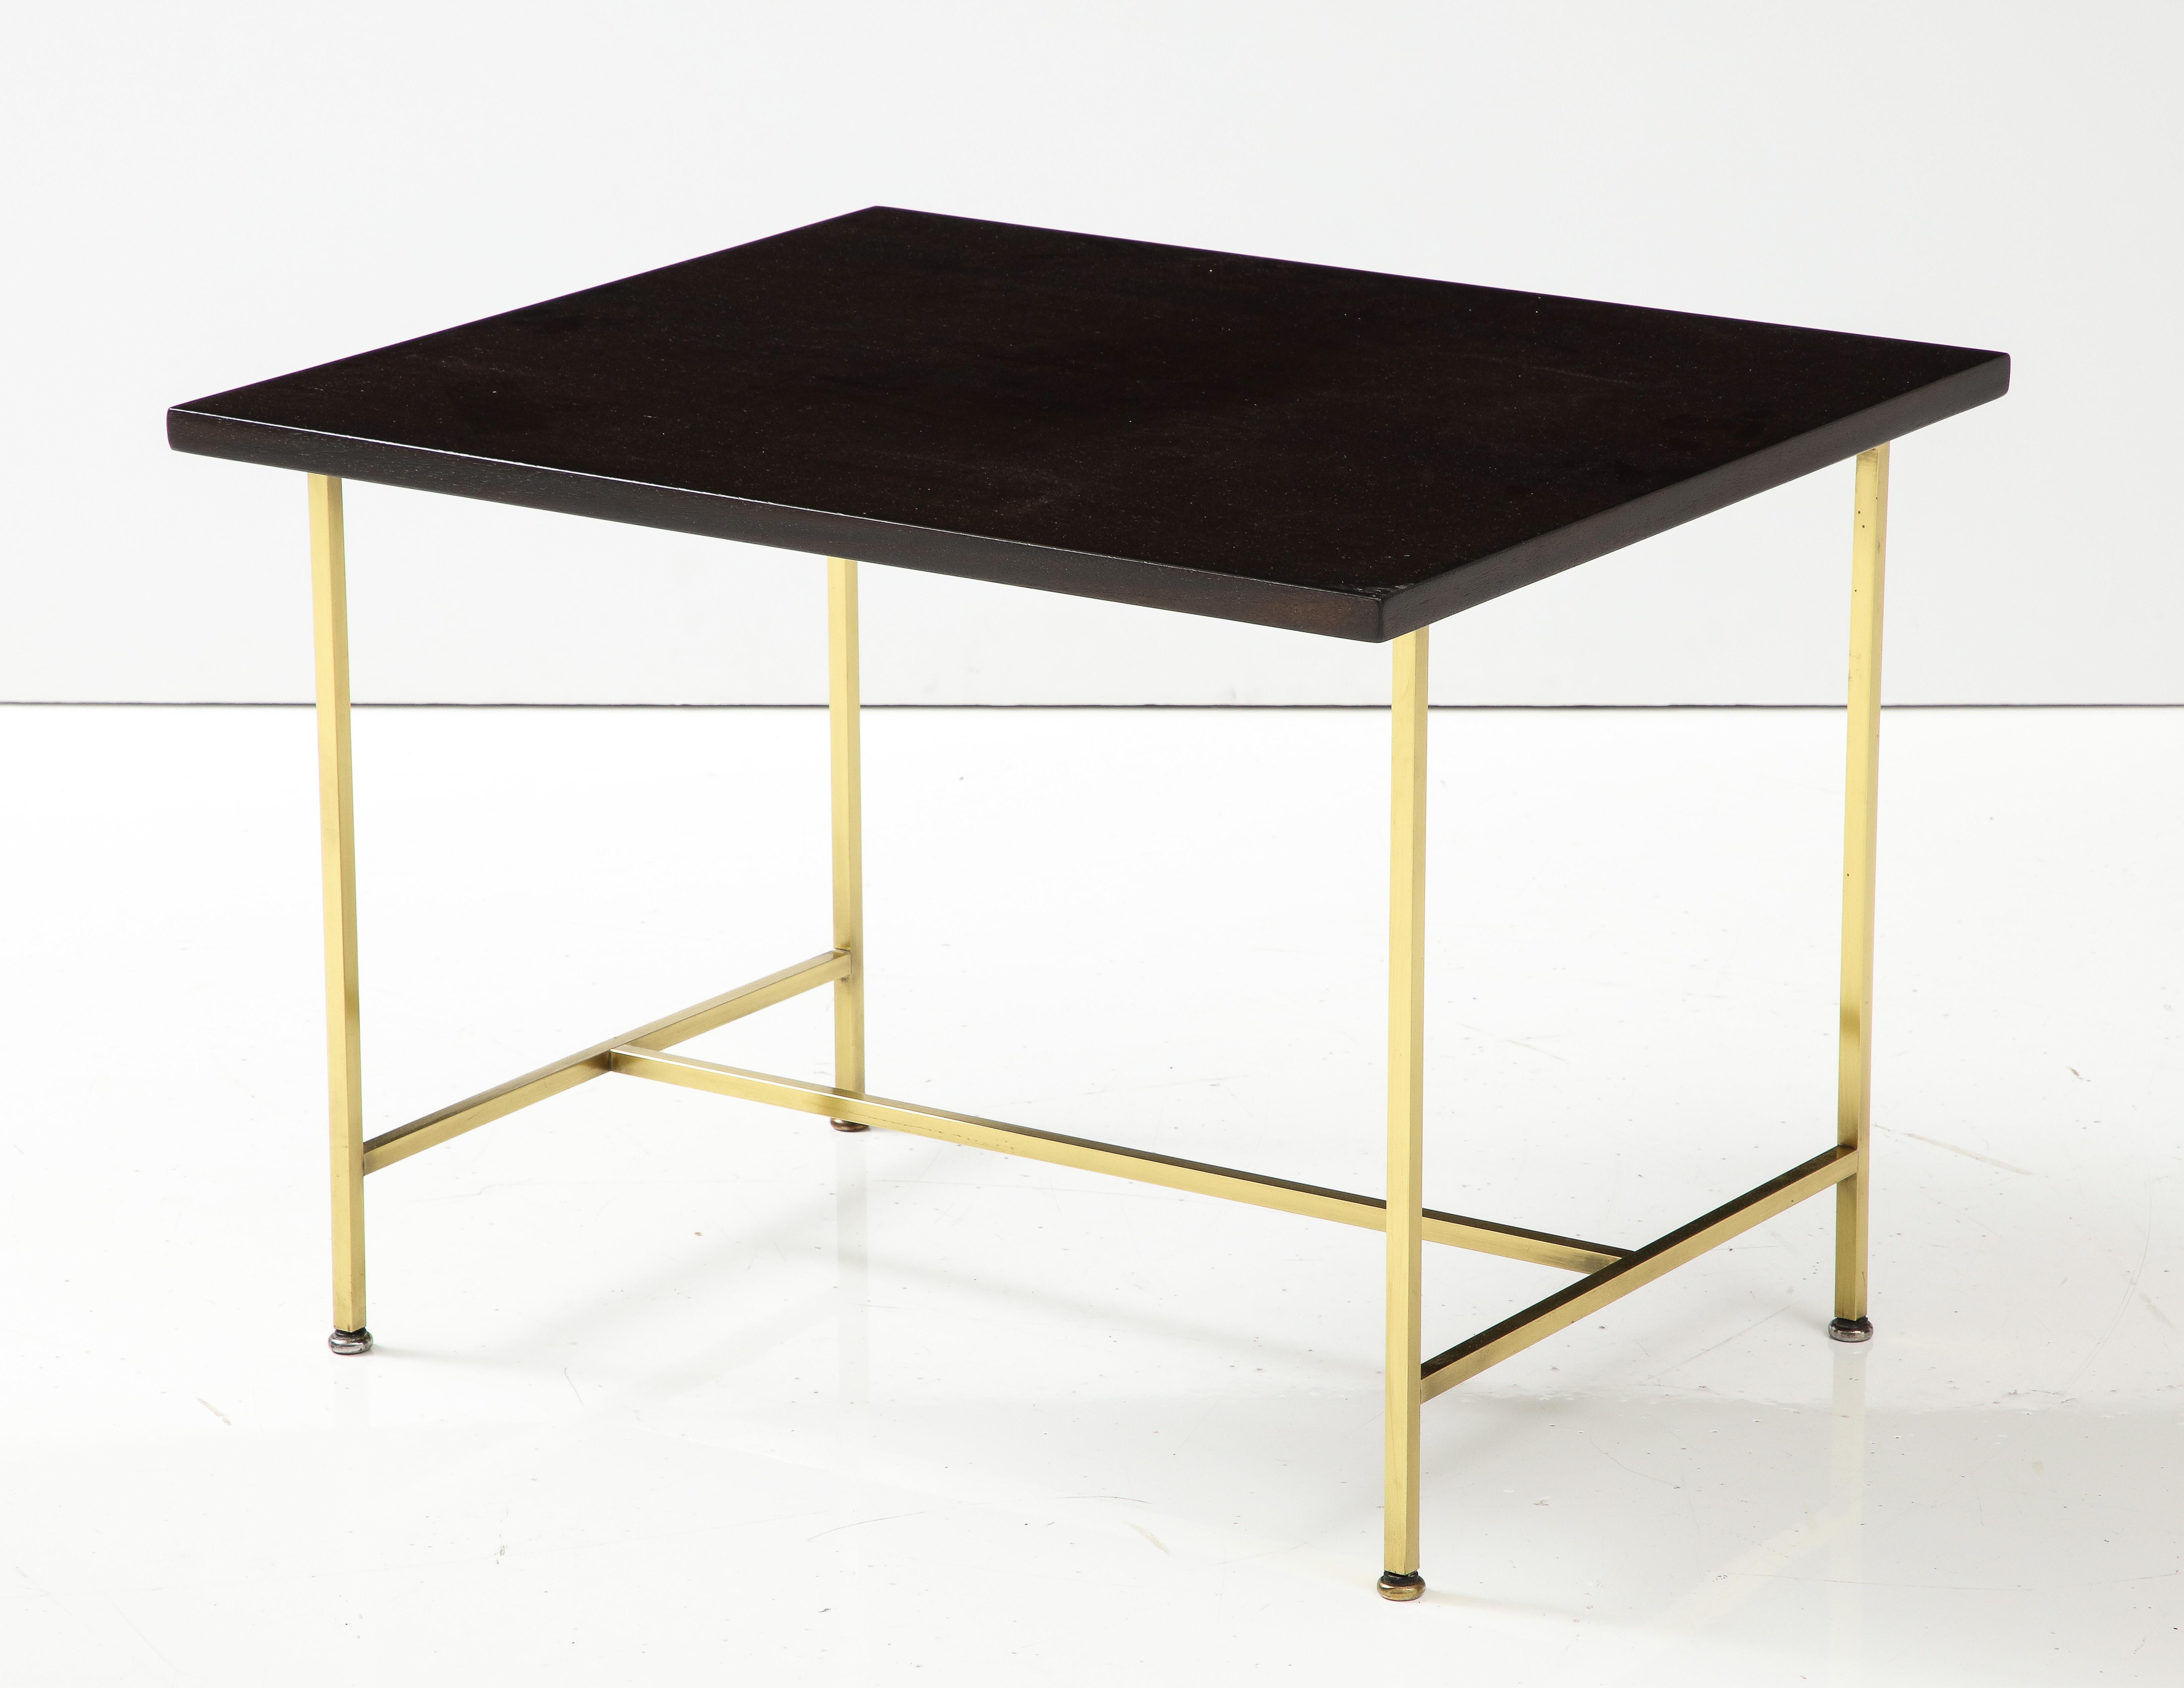 Lacquered Paul McCobb Pair of Dark Brown Mid-Century Modern Tables with Brass Bases